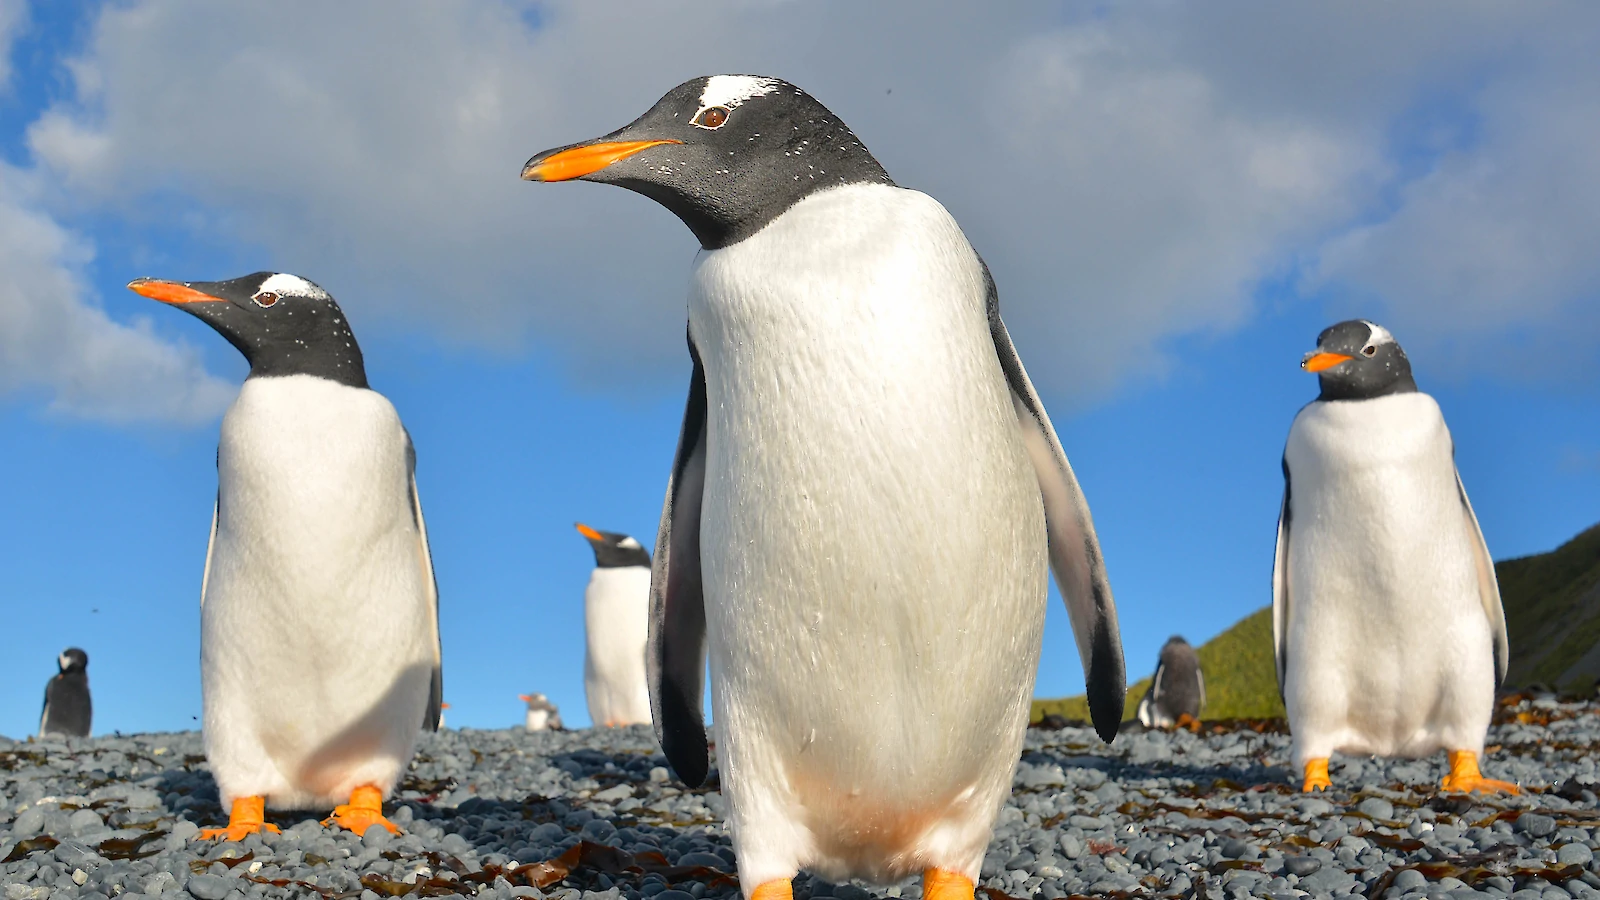 New scientific evidence suggests ‘penguins might be aliens’ based on their poop